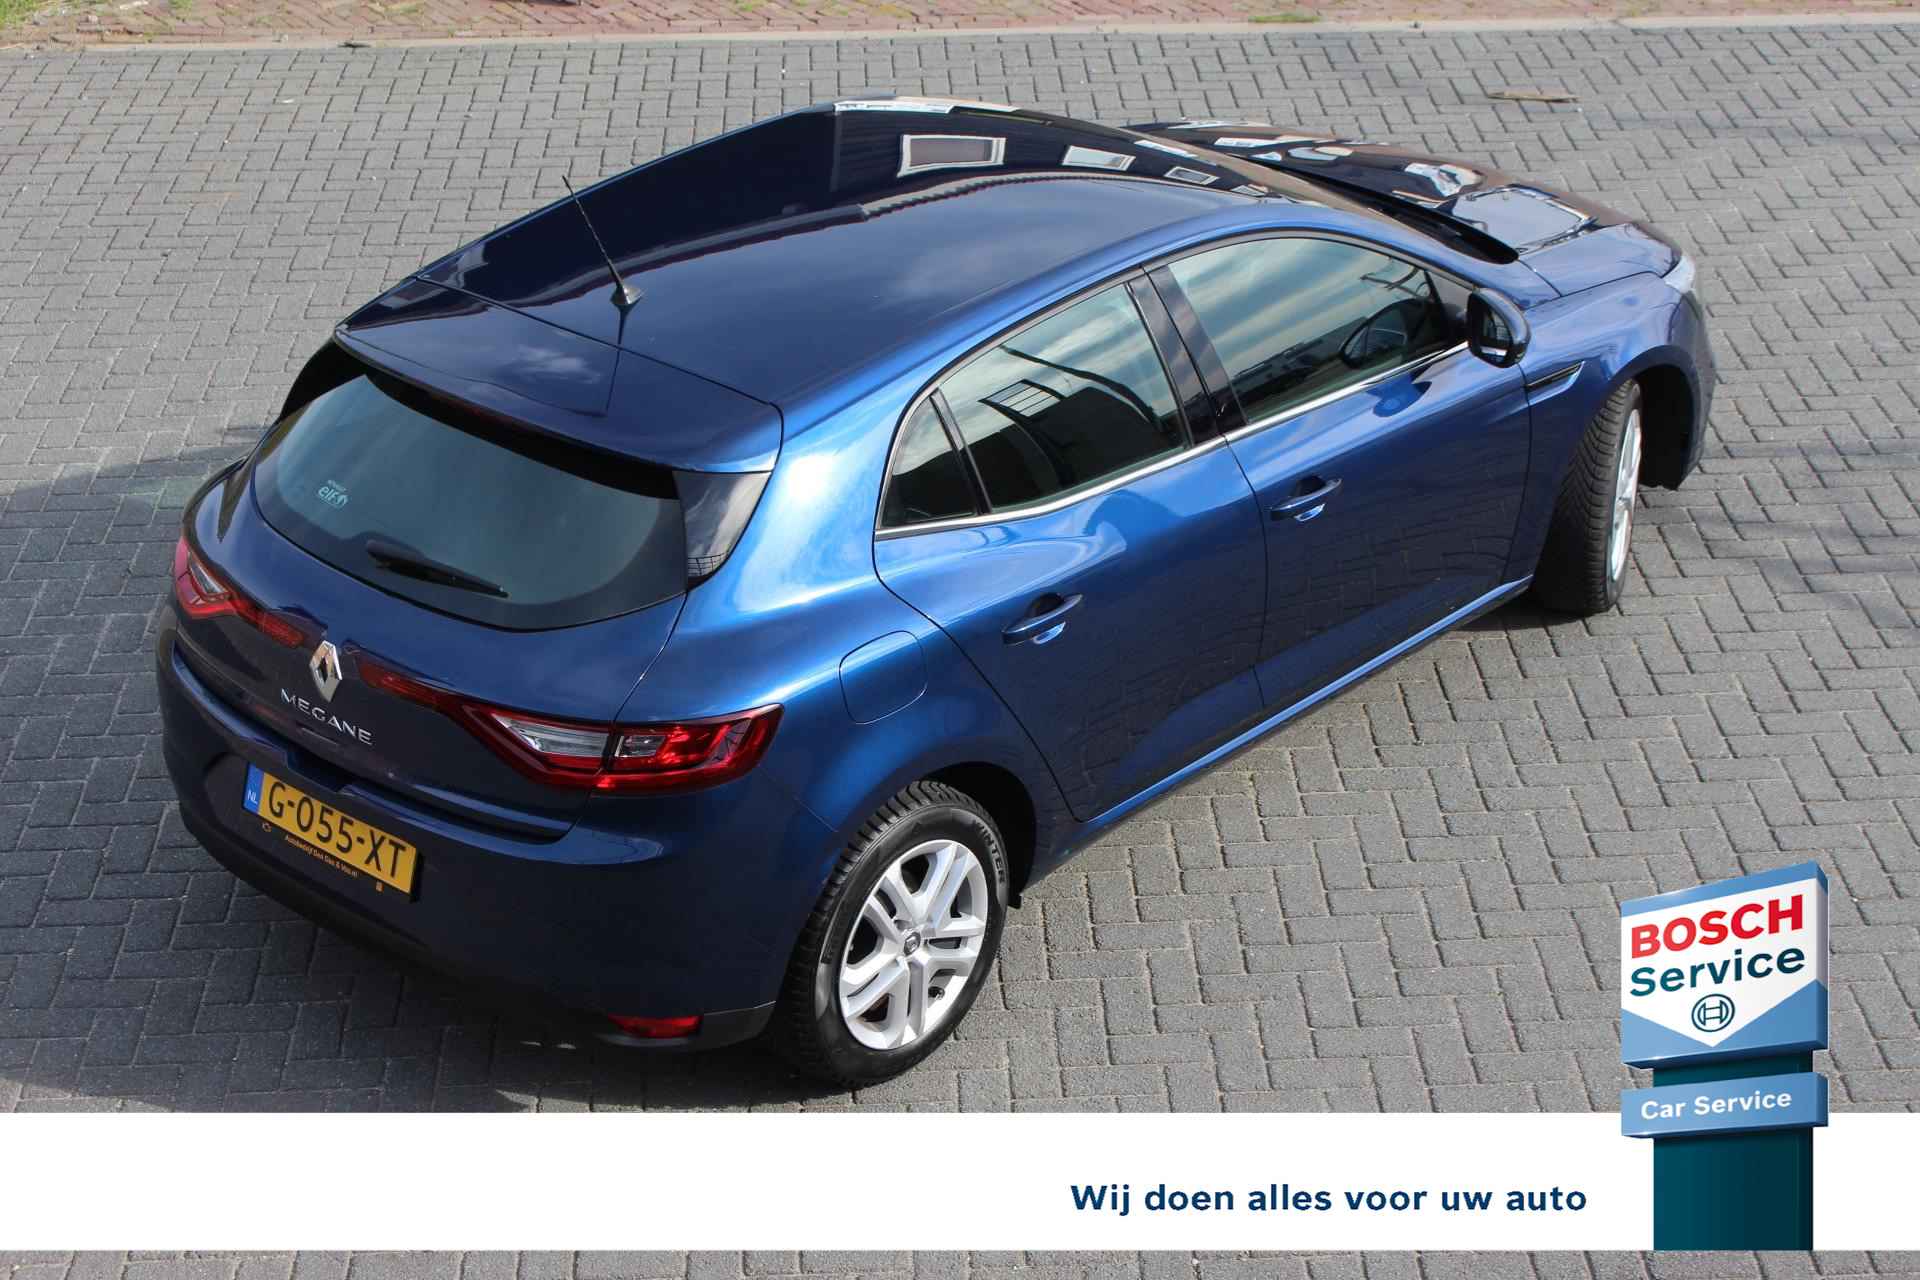 Renault Mégane 1.3 TCe Zen Dab+ audio Climate + cruise control Navi PDC achter Led verlichting voor + achter - 12/34